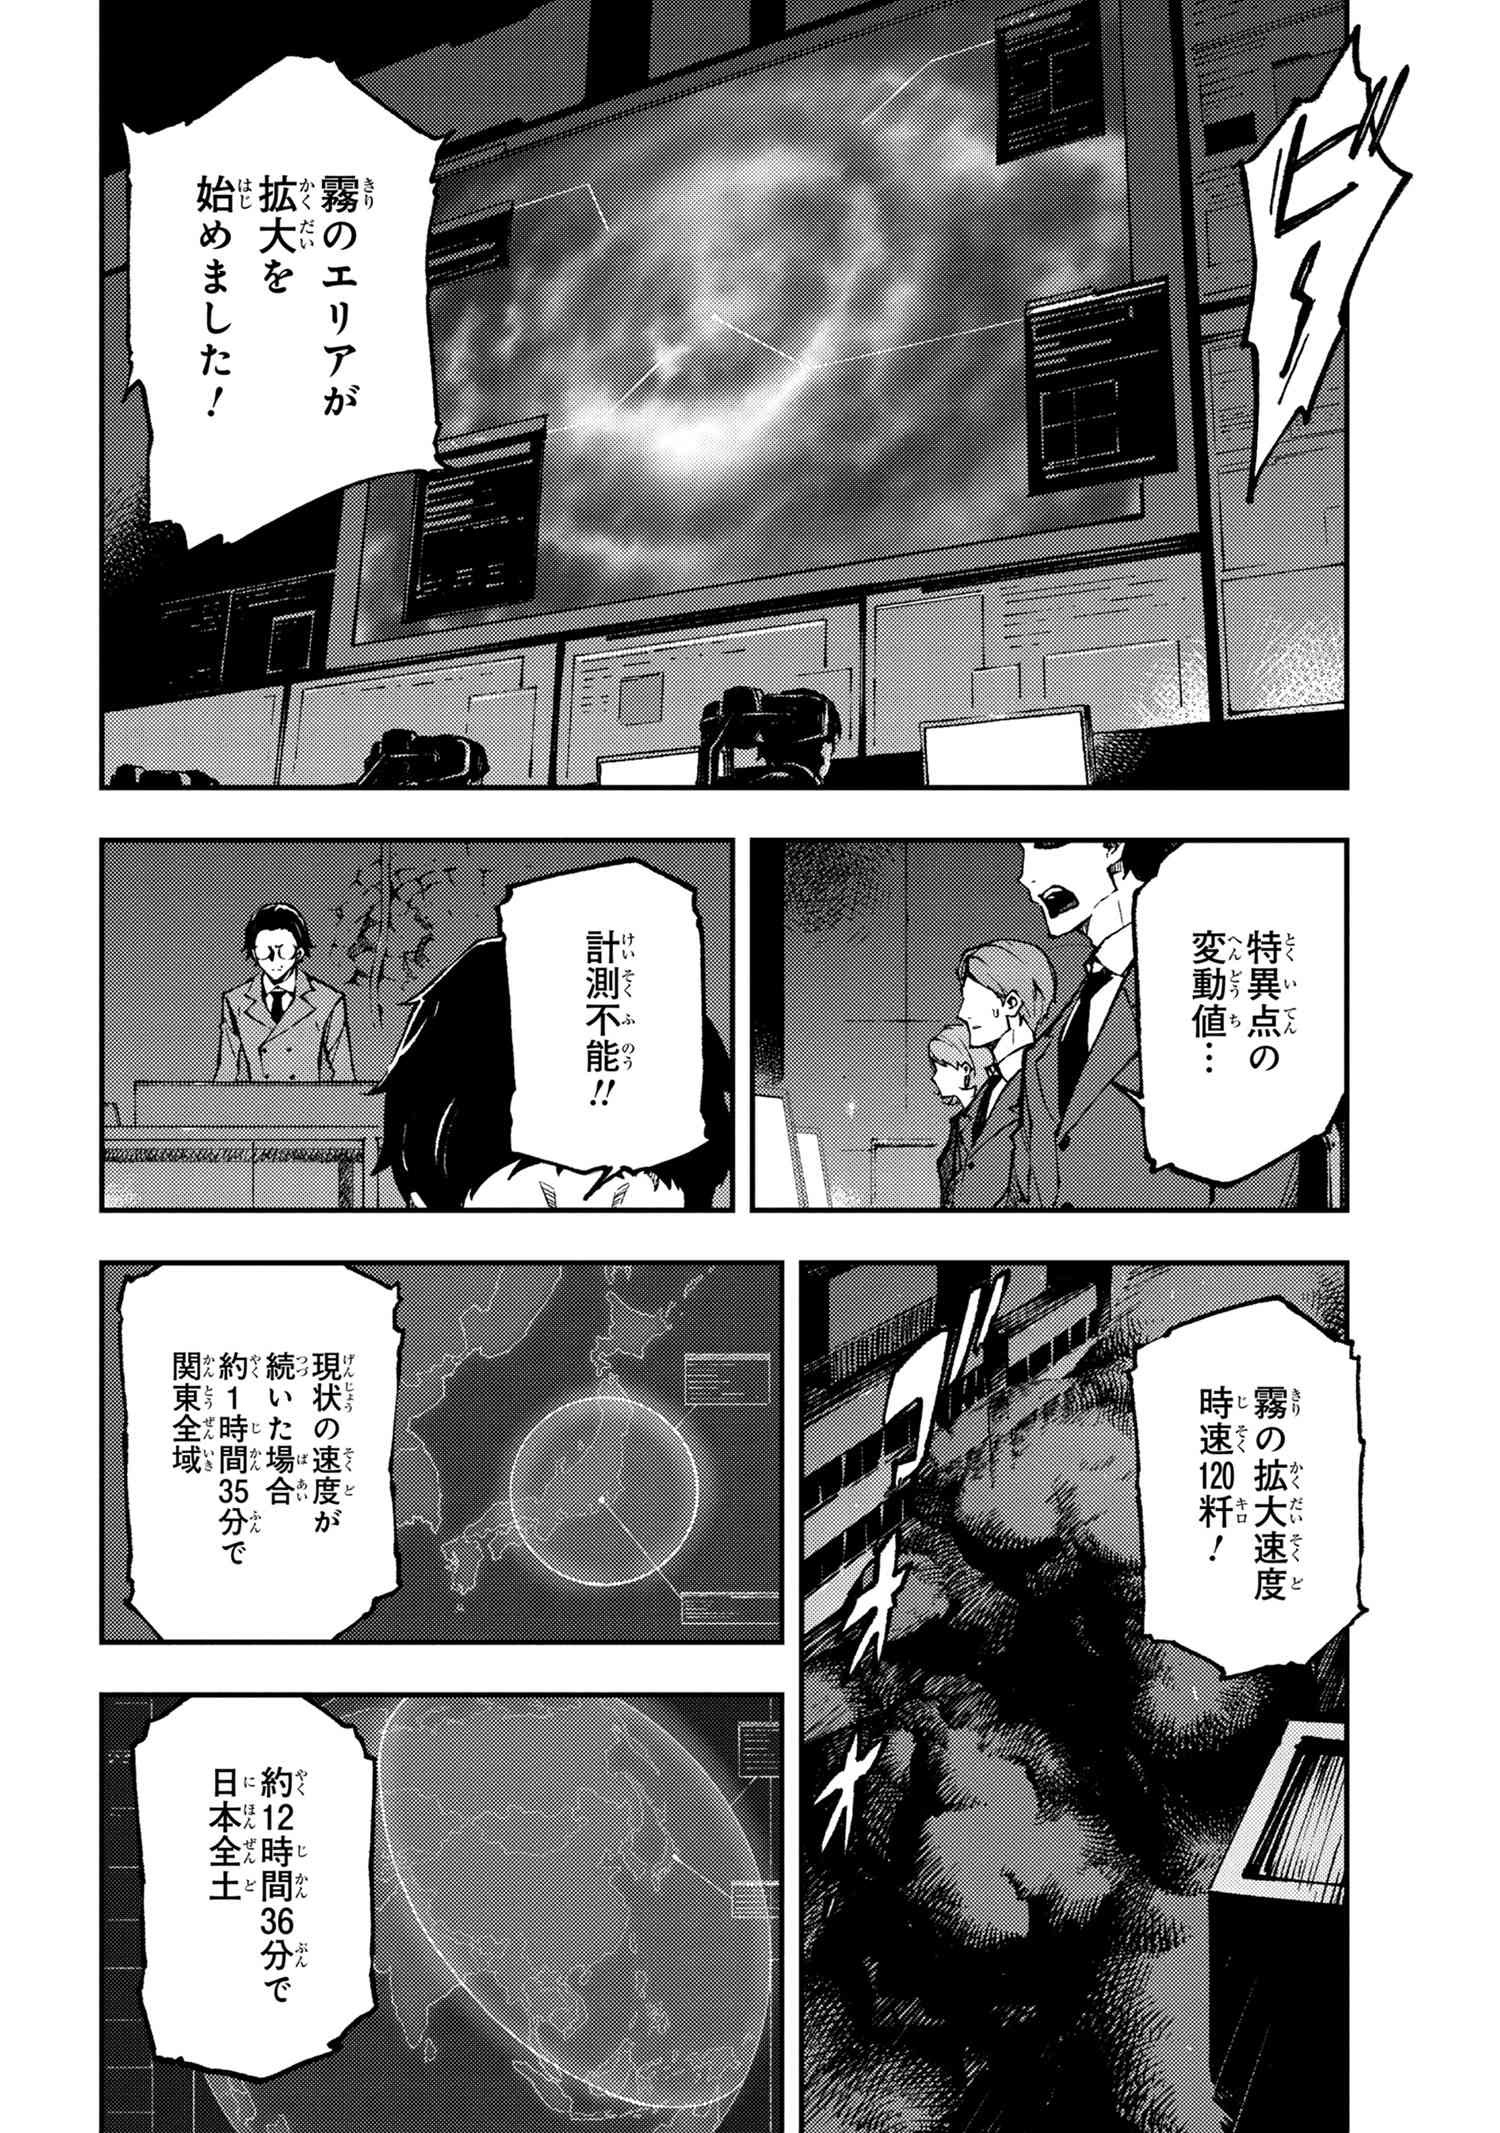 Bungou Stray Dogs: Dead Apple - Chapter 14-2 - Page 3